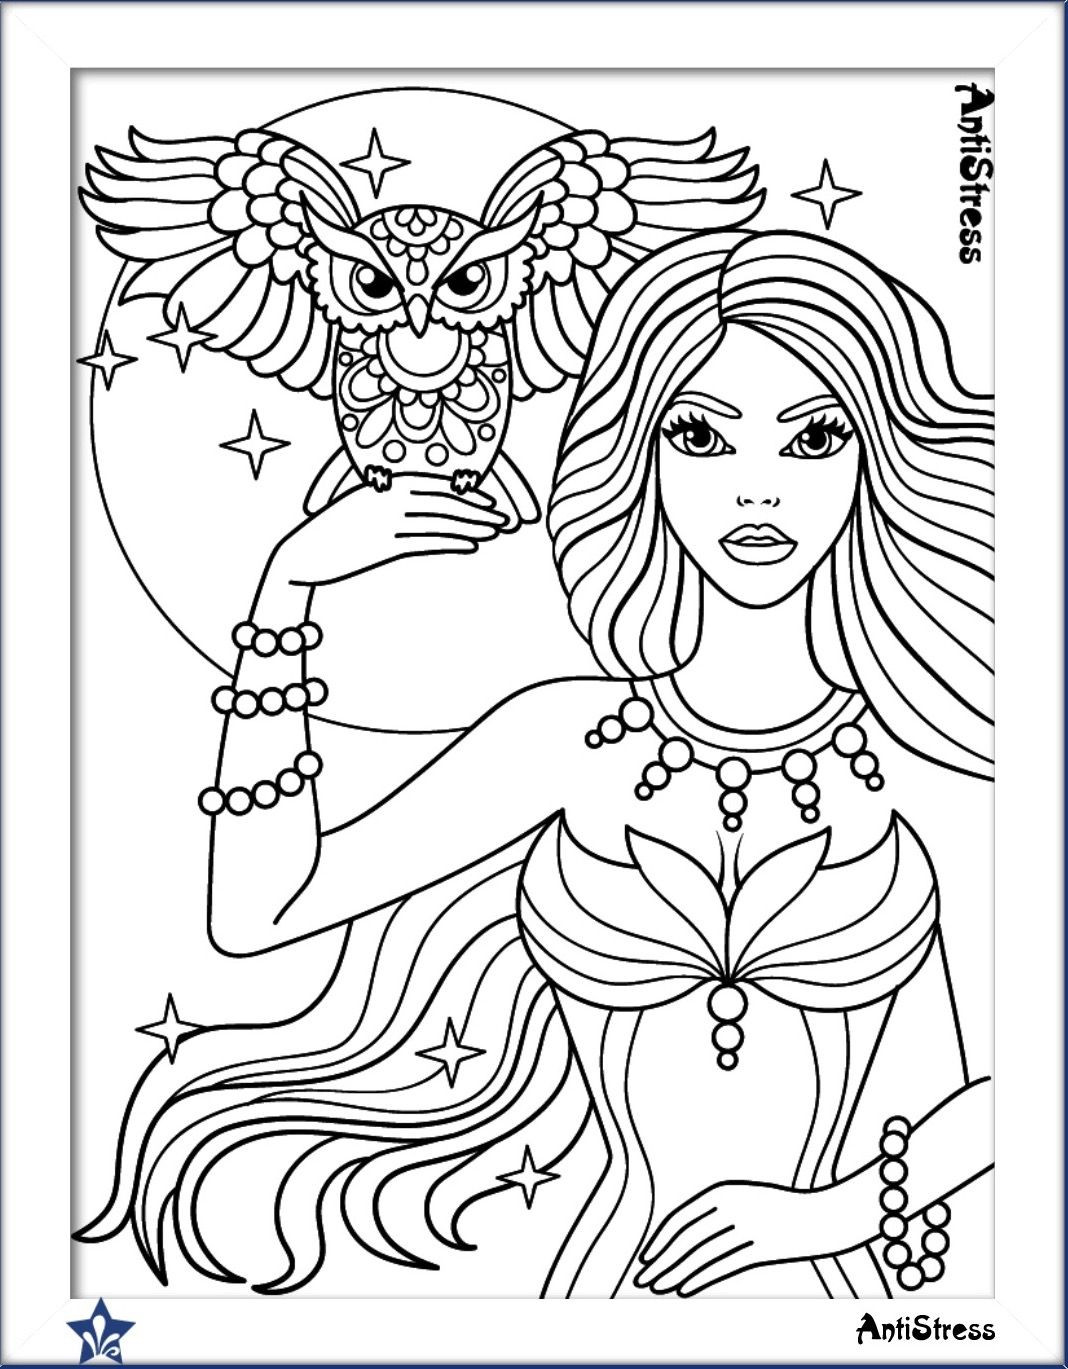 Owl Coloring Pages For Girls
 Owl and girl coloring page